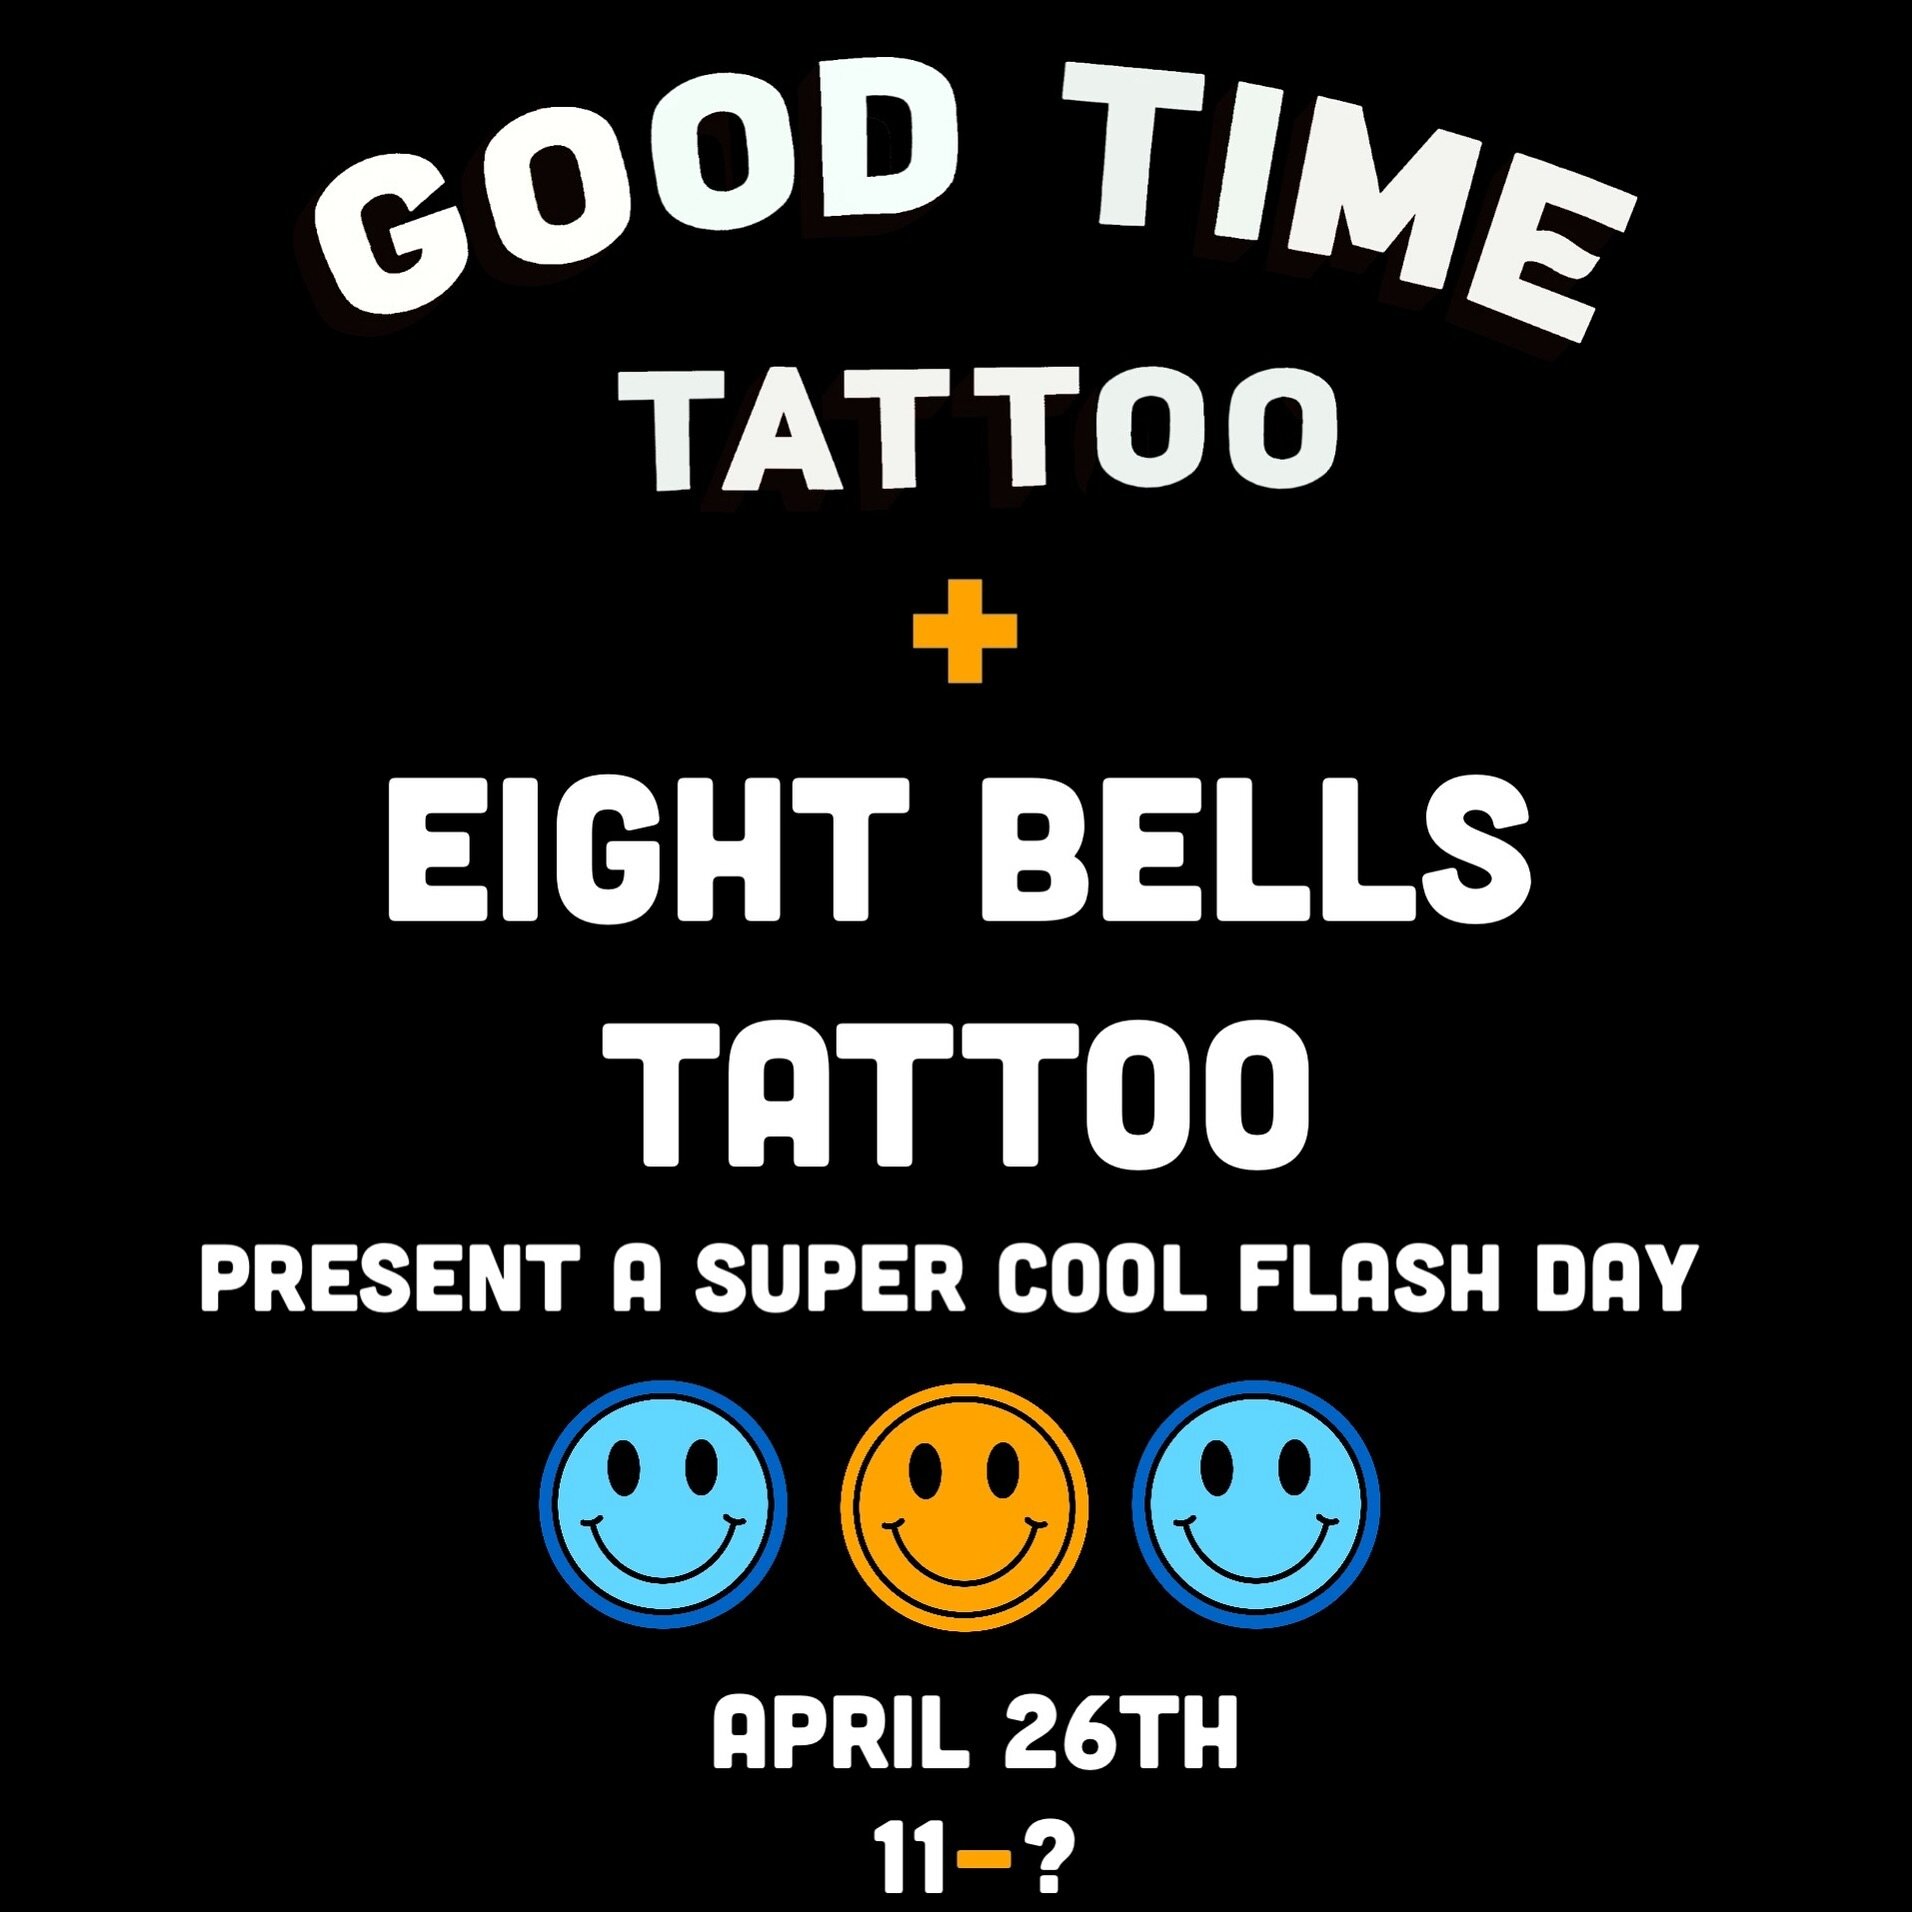 Since our last flash day got snowed out we are trying again! The gang at @goodtimetattoopa will be joining our crew at Eight Bells for a VERY cool flash day. No themes, just amazing flash. Each artist participating is tagged! Please feel free to cont